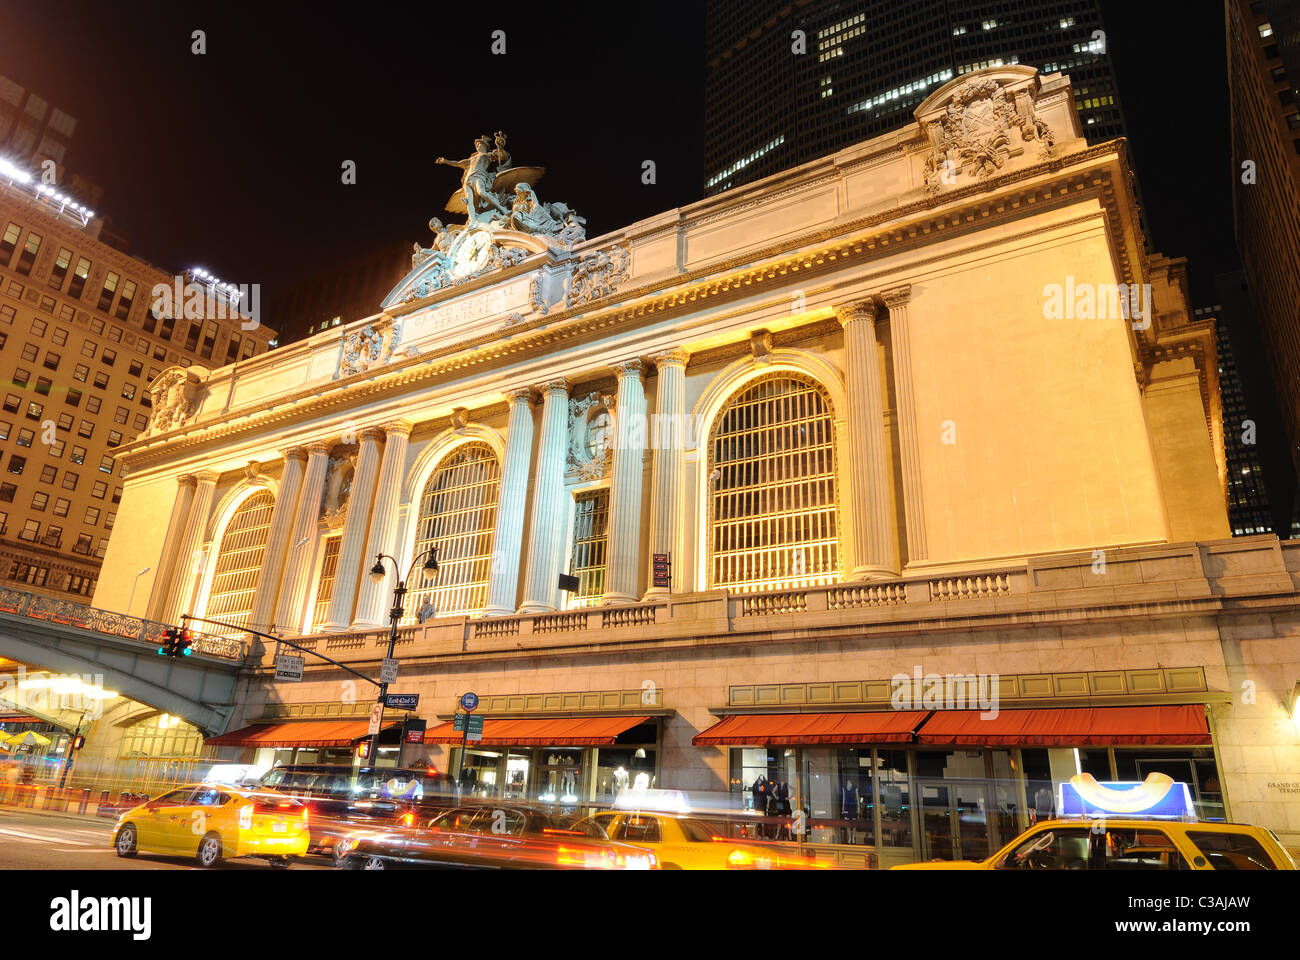 Grand Central Terminal on 42nd street in New York City. Stock Photo